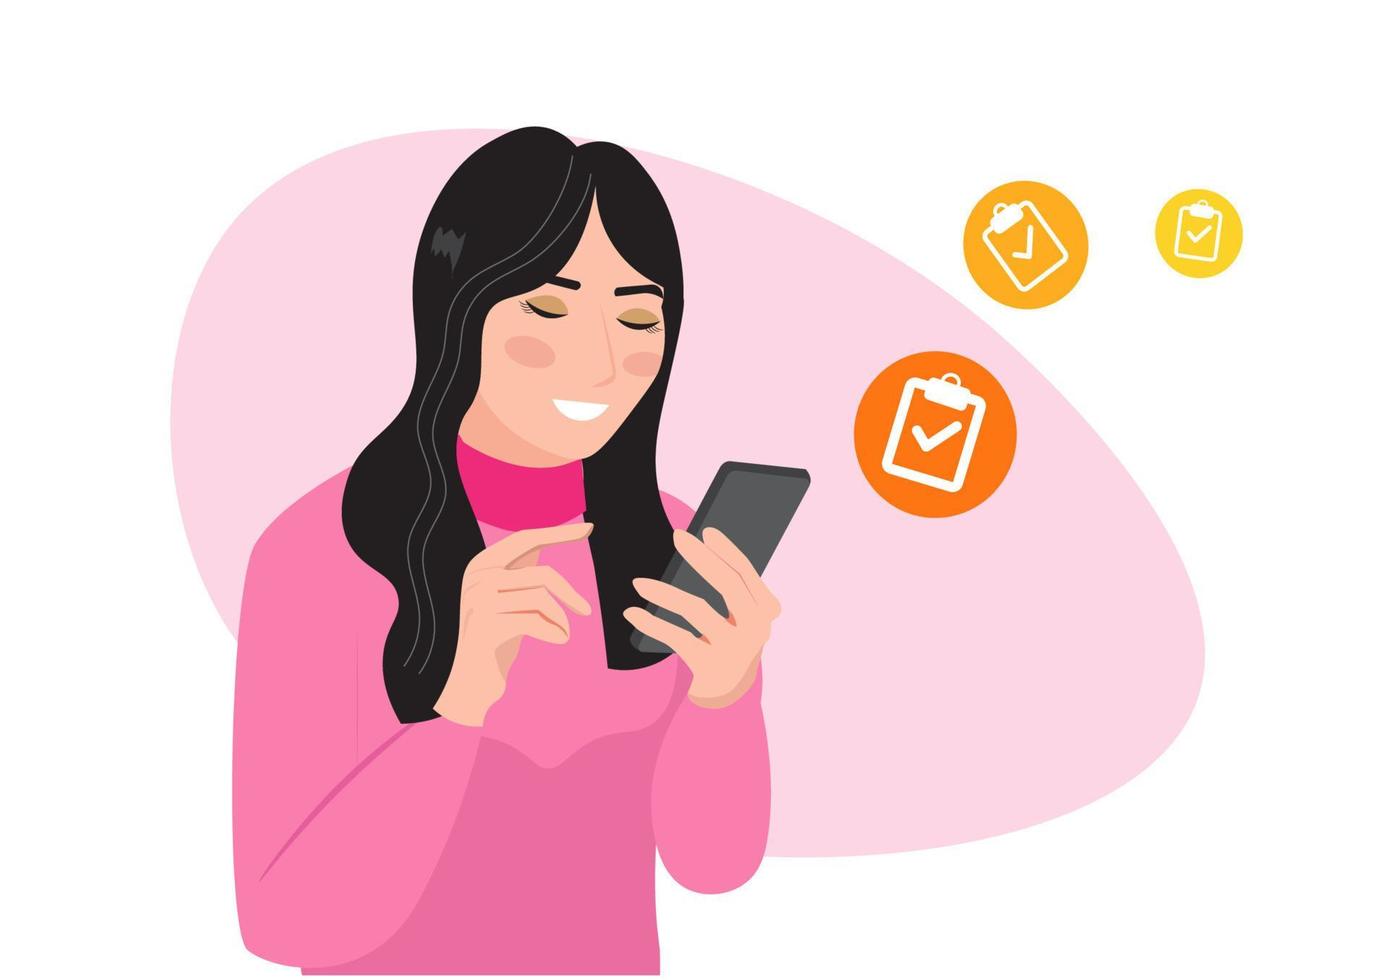 Happy woman with smartphone in hand checking her social media accounts. Vector illustration concept of using social media or online marketing.